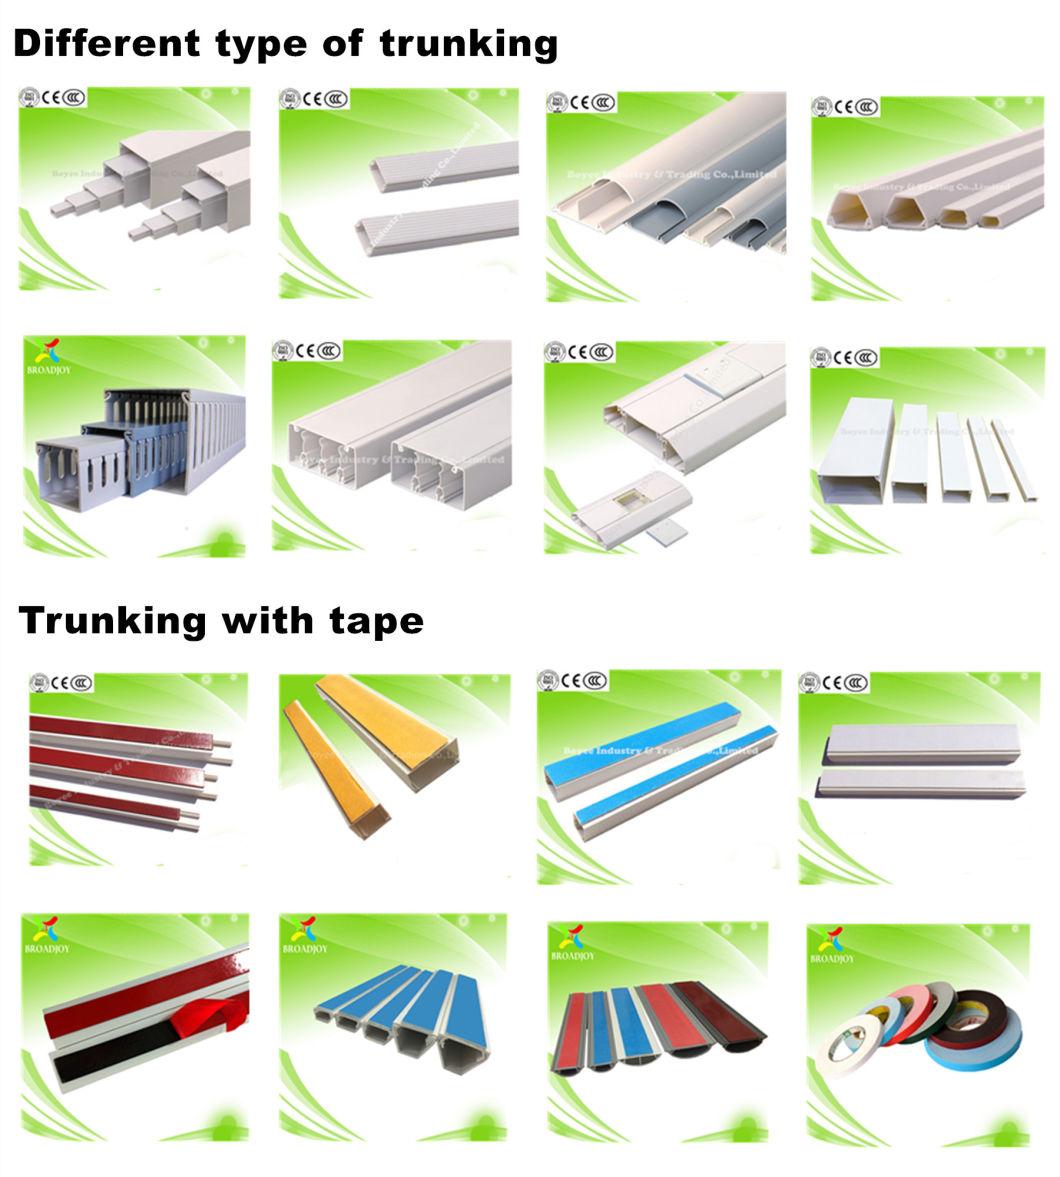 Latin Market PVC Electricidad Canaletas Con Adhesivo 20X10mmpvc Trunking with Blue Tape / Electrical Cable Trunking with Adhesive